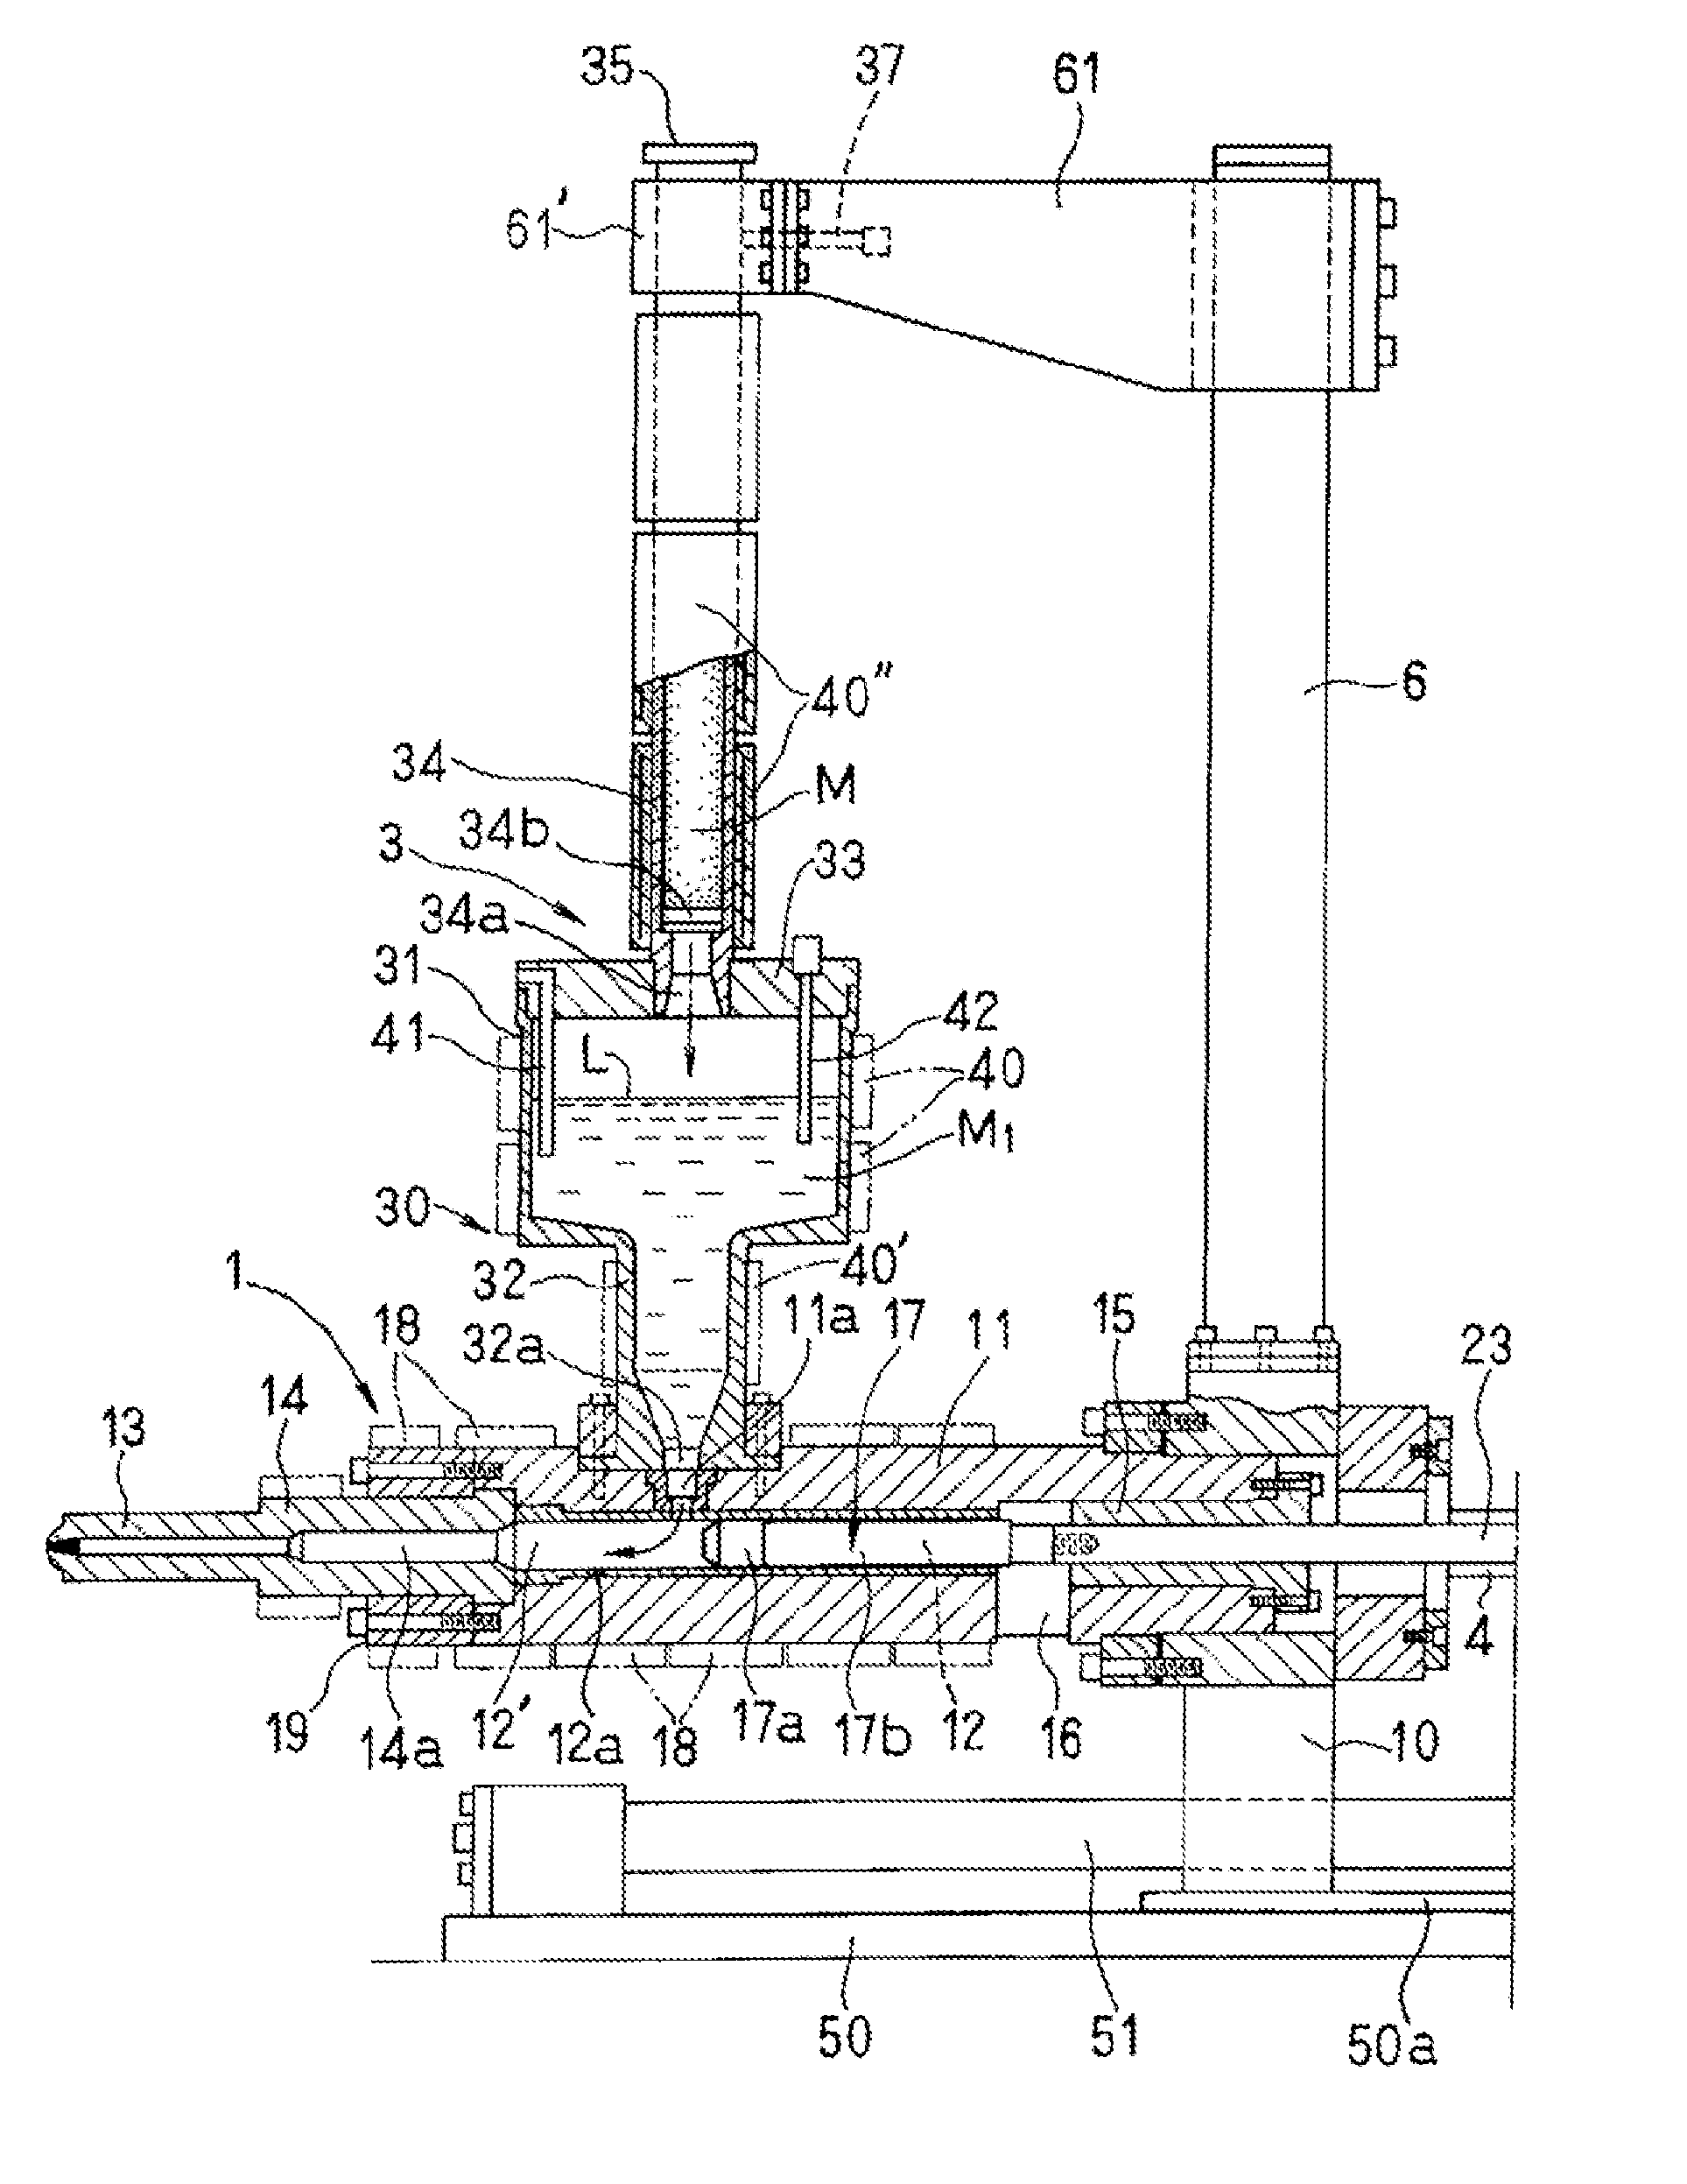 Device for melting, storing, and feeding metal material from bar-shaped metal material intended for injection apparatus for molding metal product